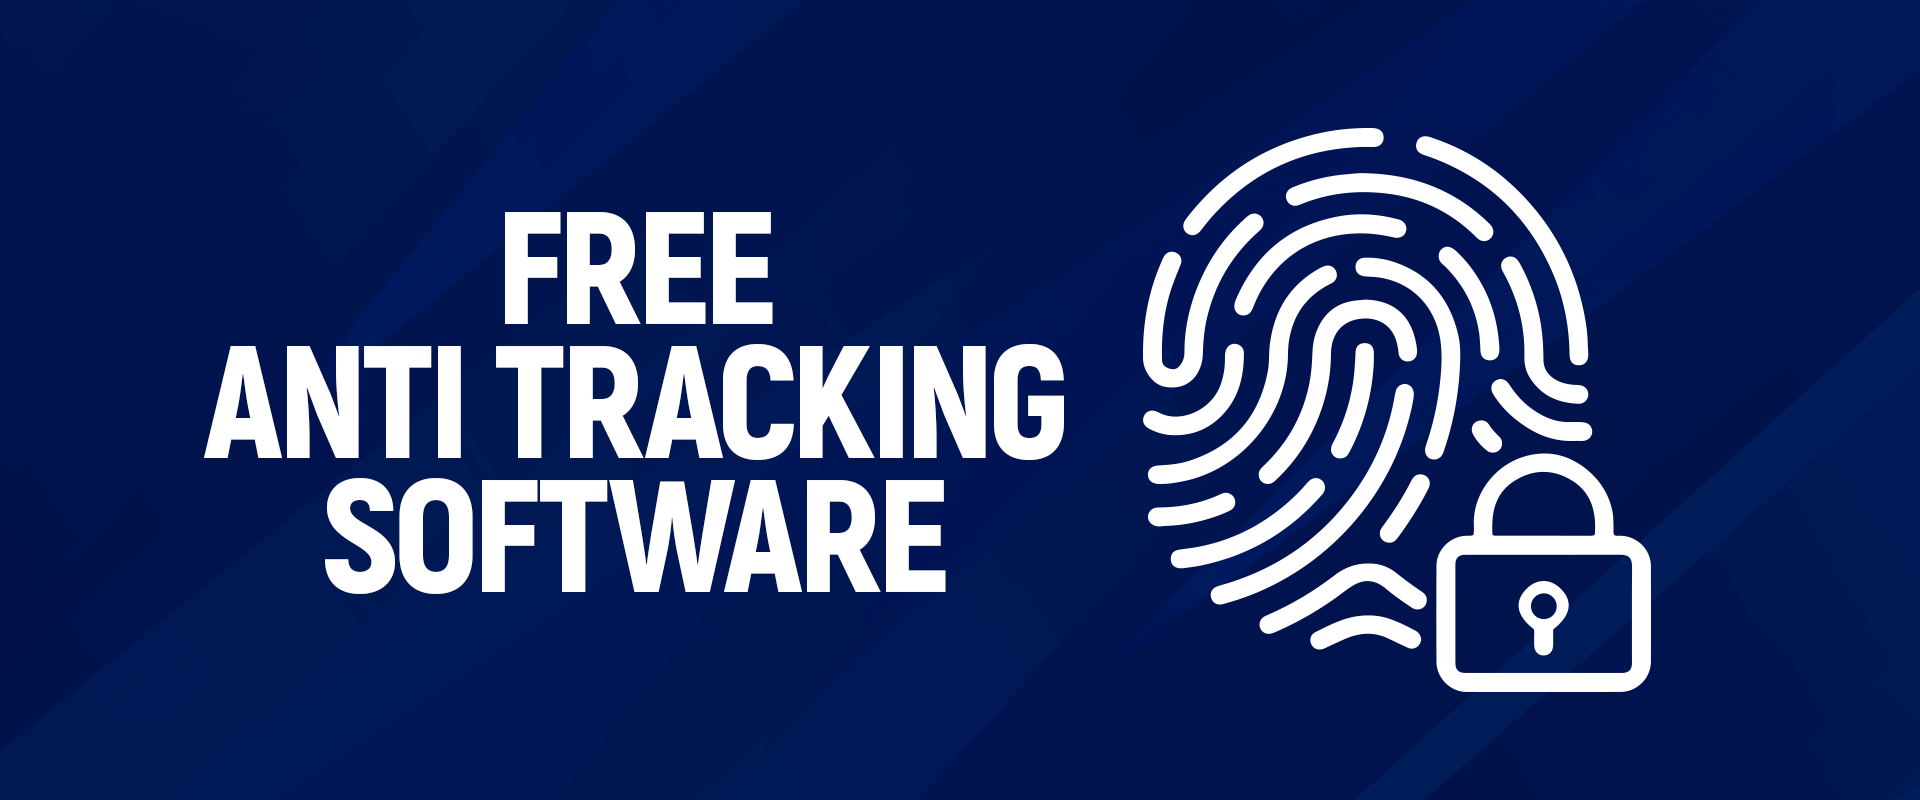 Anti-Tracking Software